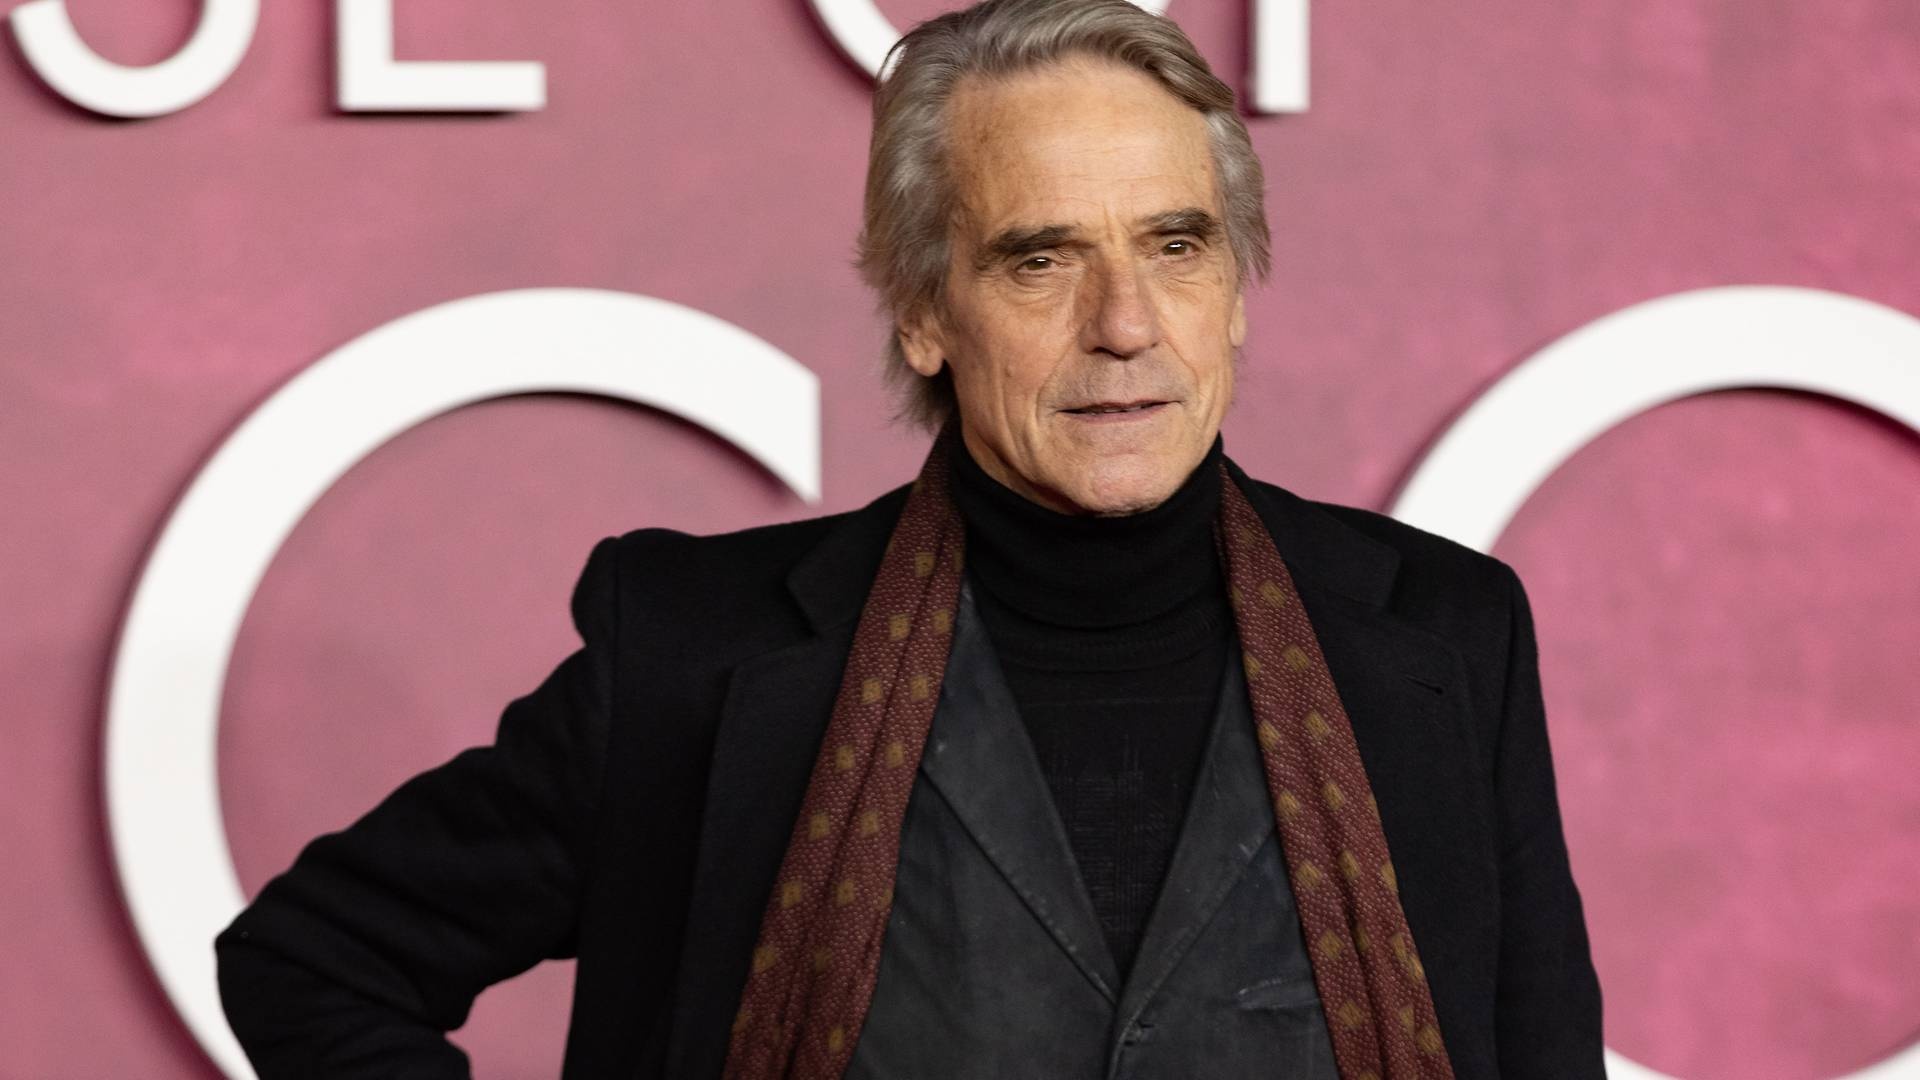 Jeremy Irons, Movies, Snyder cut, Justice League, 1920x1080 Full HD Desktop